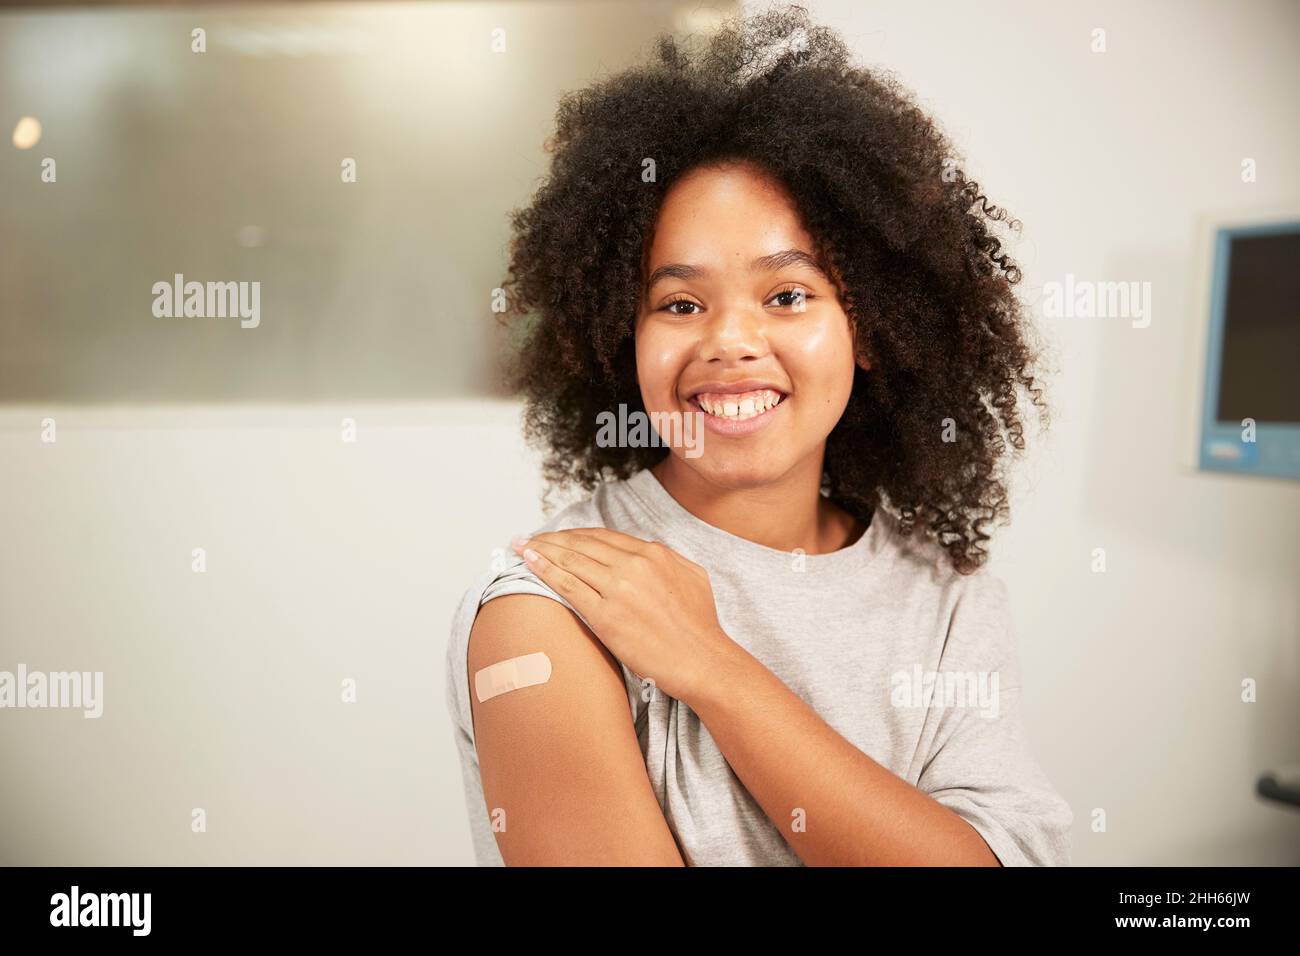 Portrait of smiling beatiful woman with curly hairstyle and arms